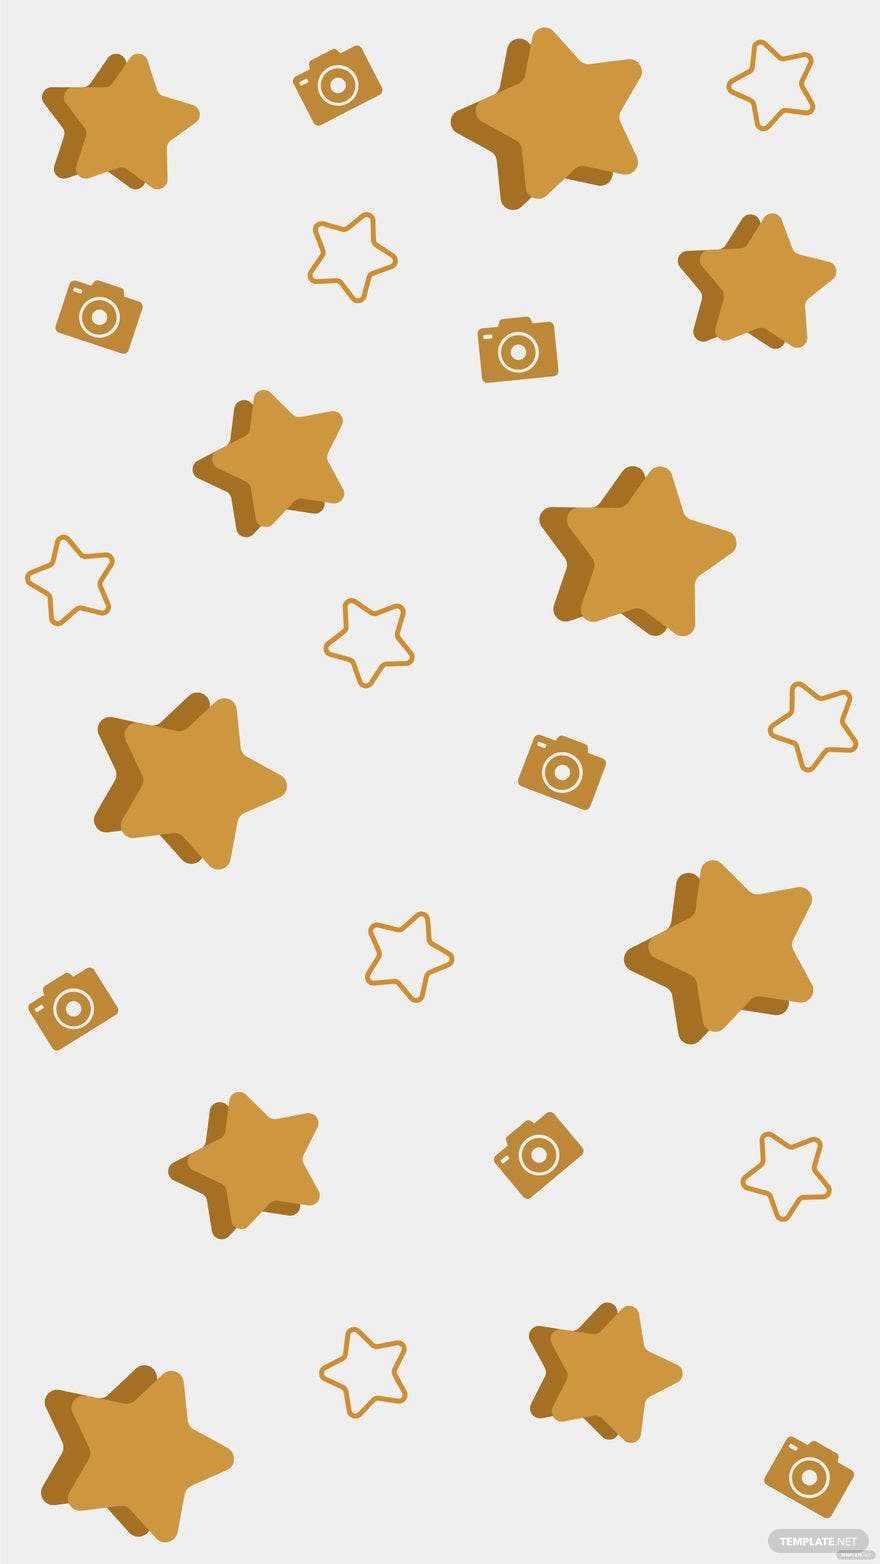 A pattern of stars and cookies on white - VSCO